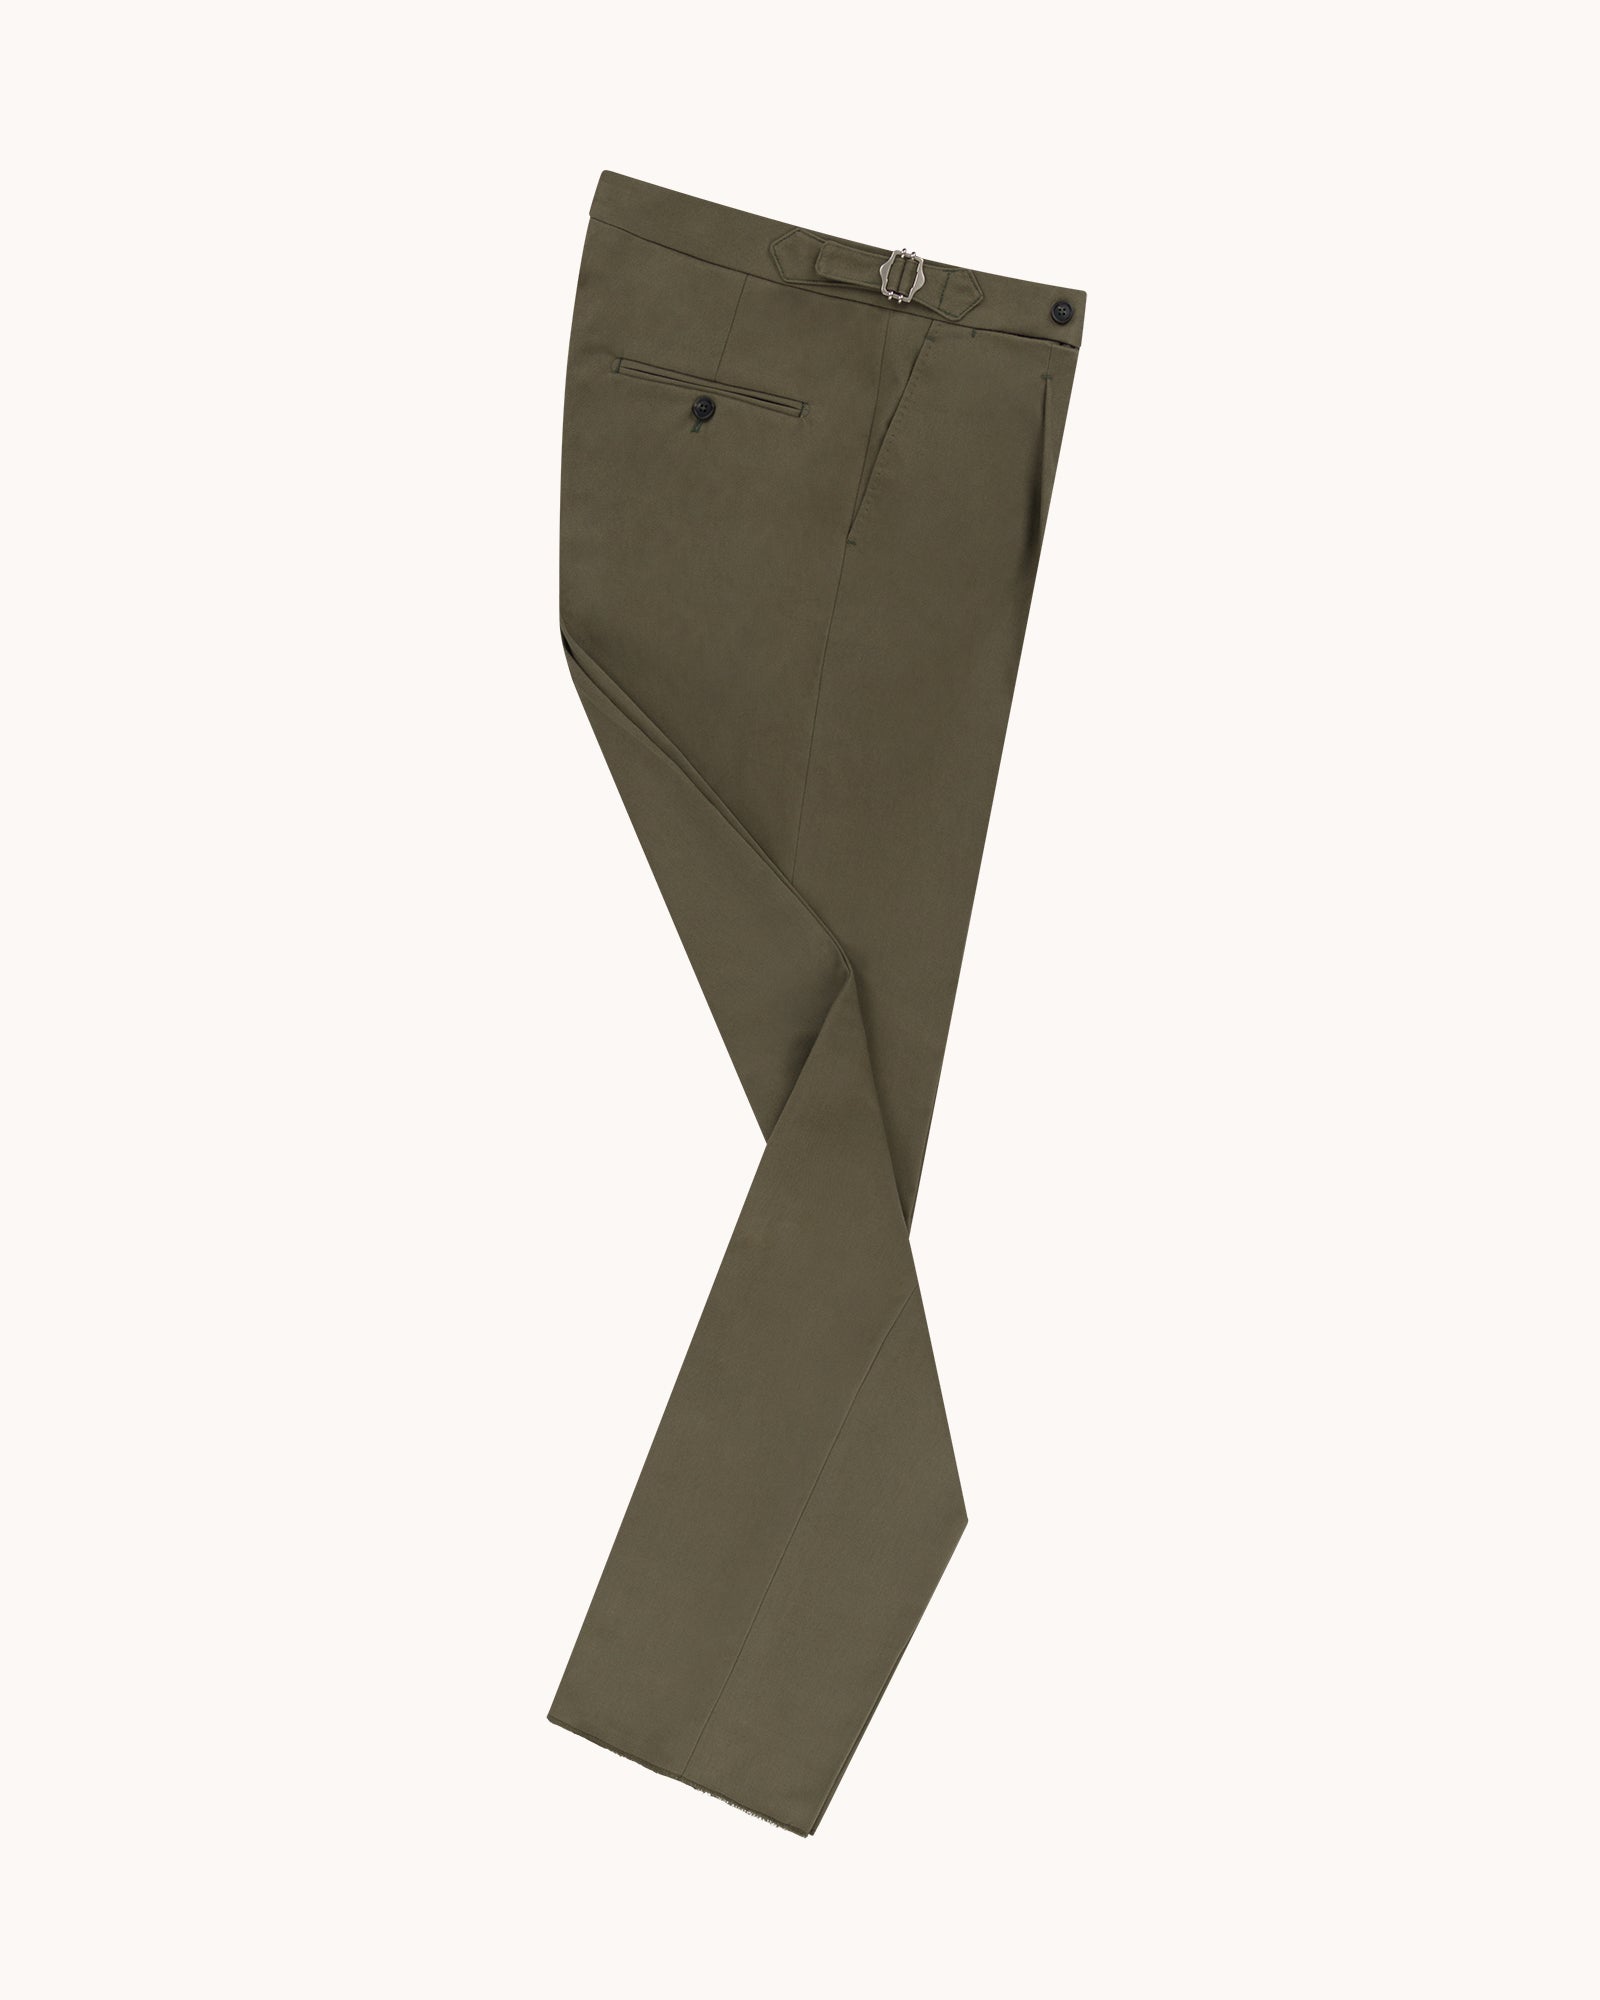 Single Pleat Trouser - Olive Brushed Cotton